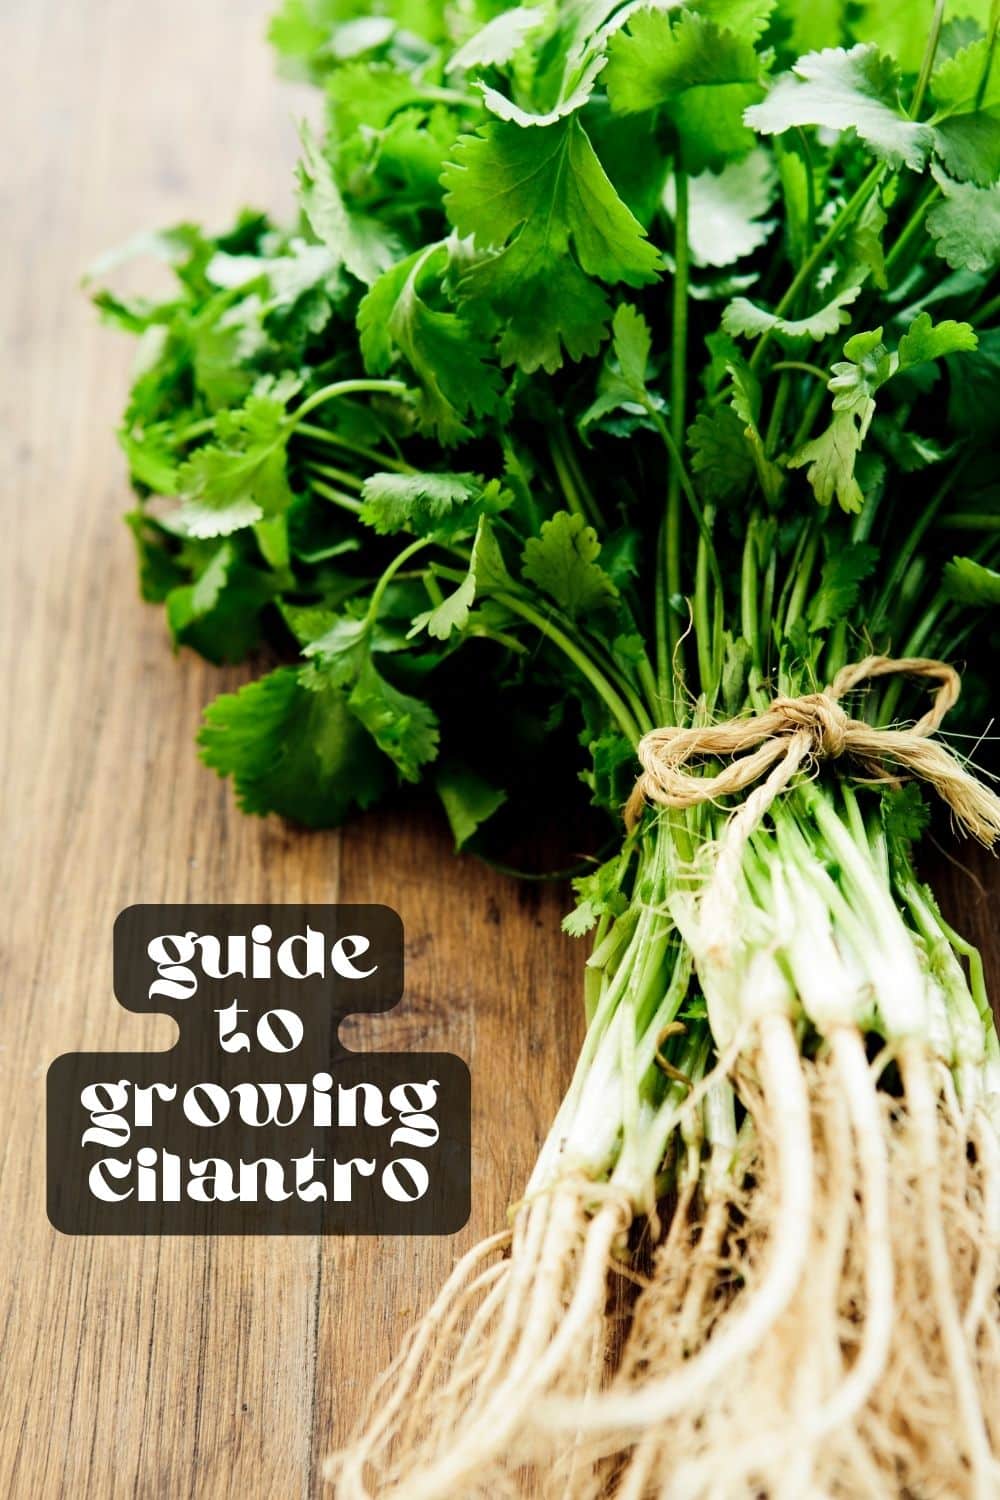 Whether you love or hate it, cilantro is one of the best herbs to grow at home! If you love the citrusy, peppery flavor of cilantro, you're in for a treat. It's so easy to grow and takes no time at all. Before you know it, you'll have an endless supply of fresh cilantro to use in your cooking.